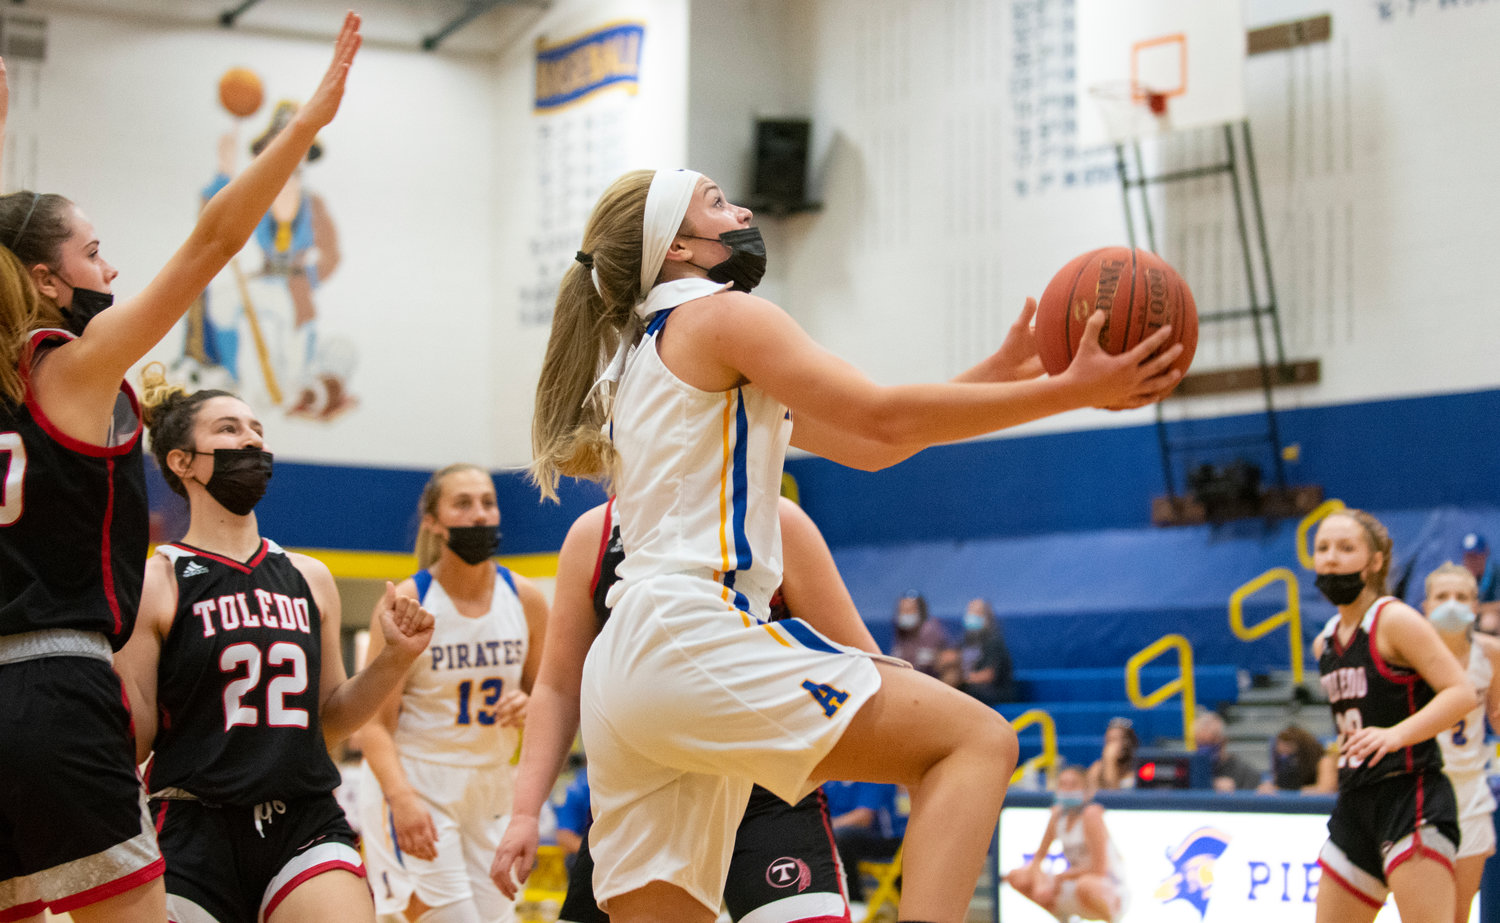 Adna's Kaylin Todds breaks free for an uncontested layup against Toledo on Thursday.